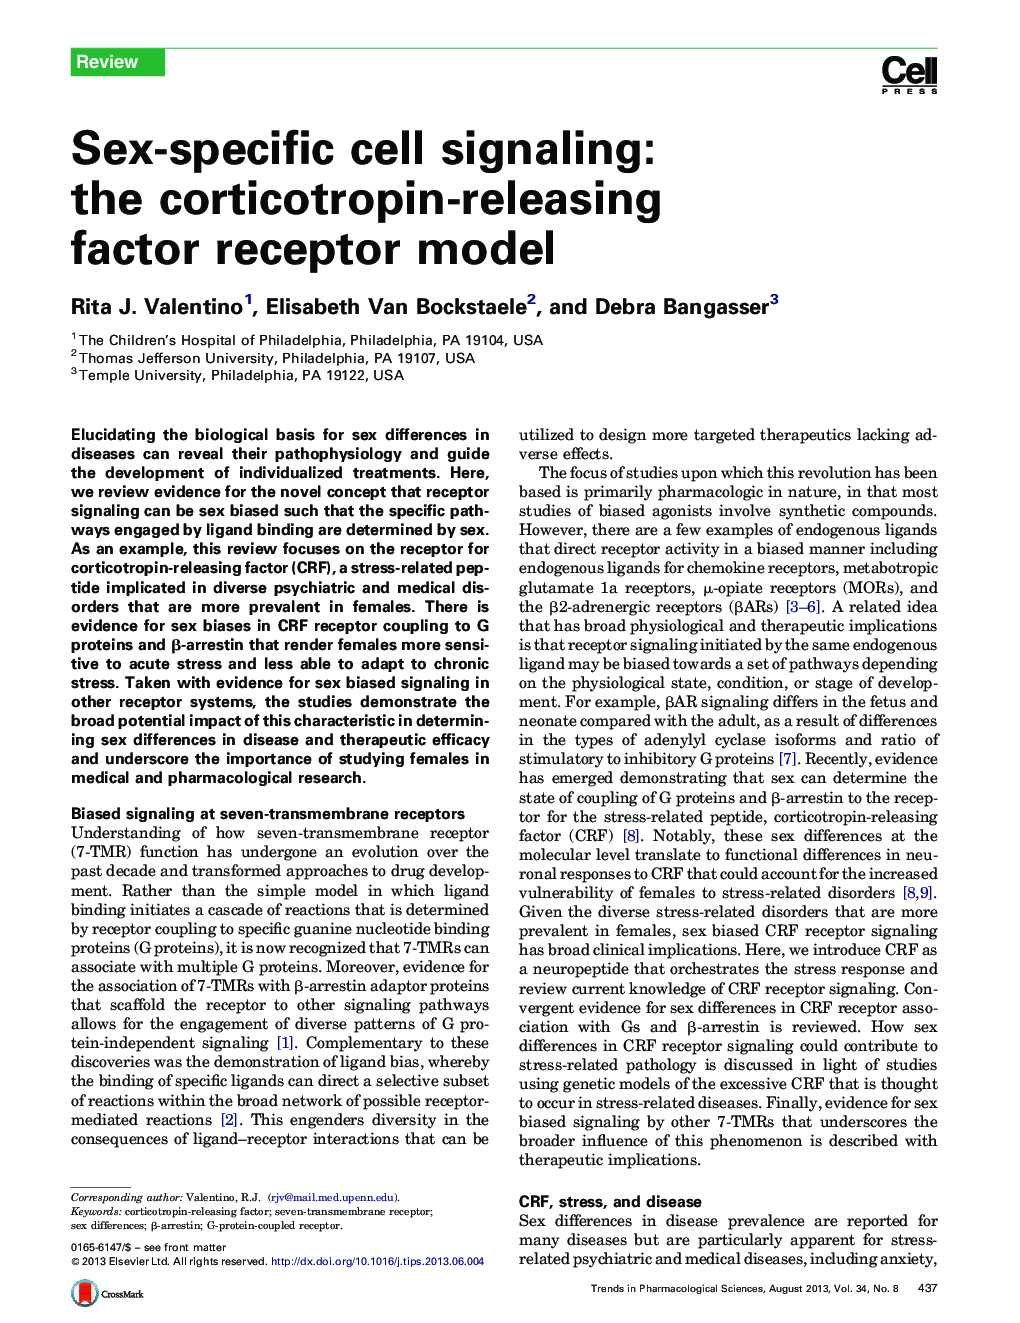 Sex-specific cell signaling: the corticotropin-releasing factor receptor model